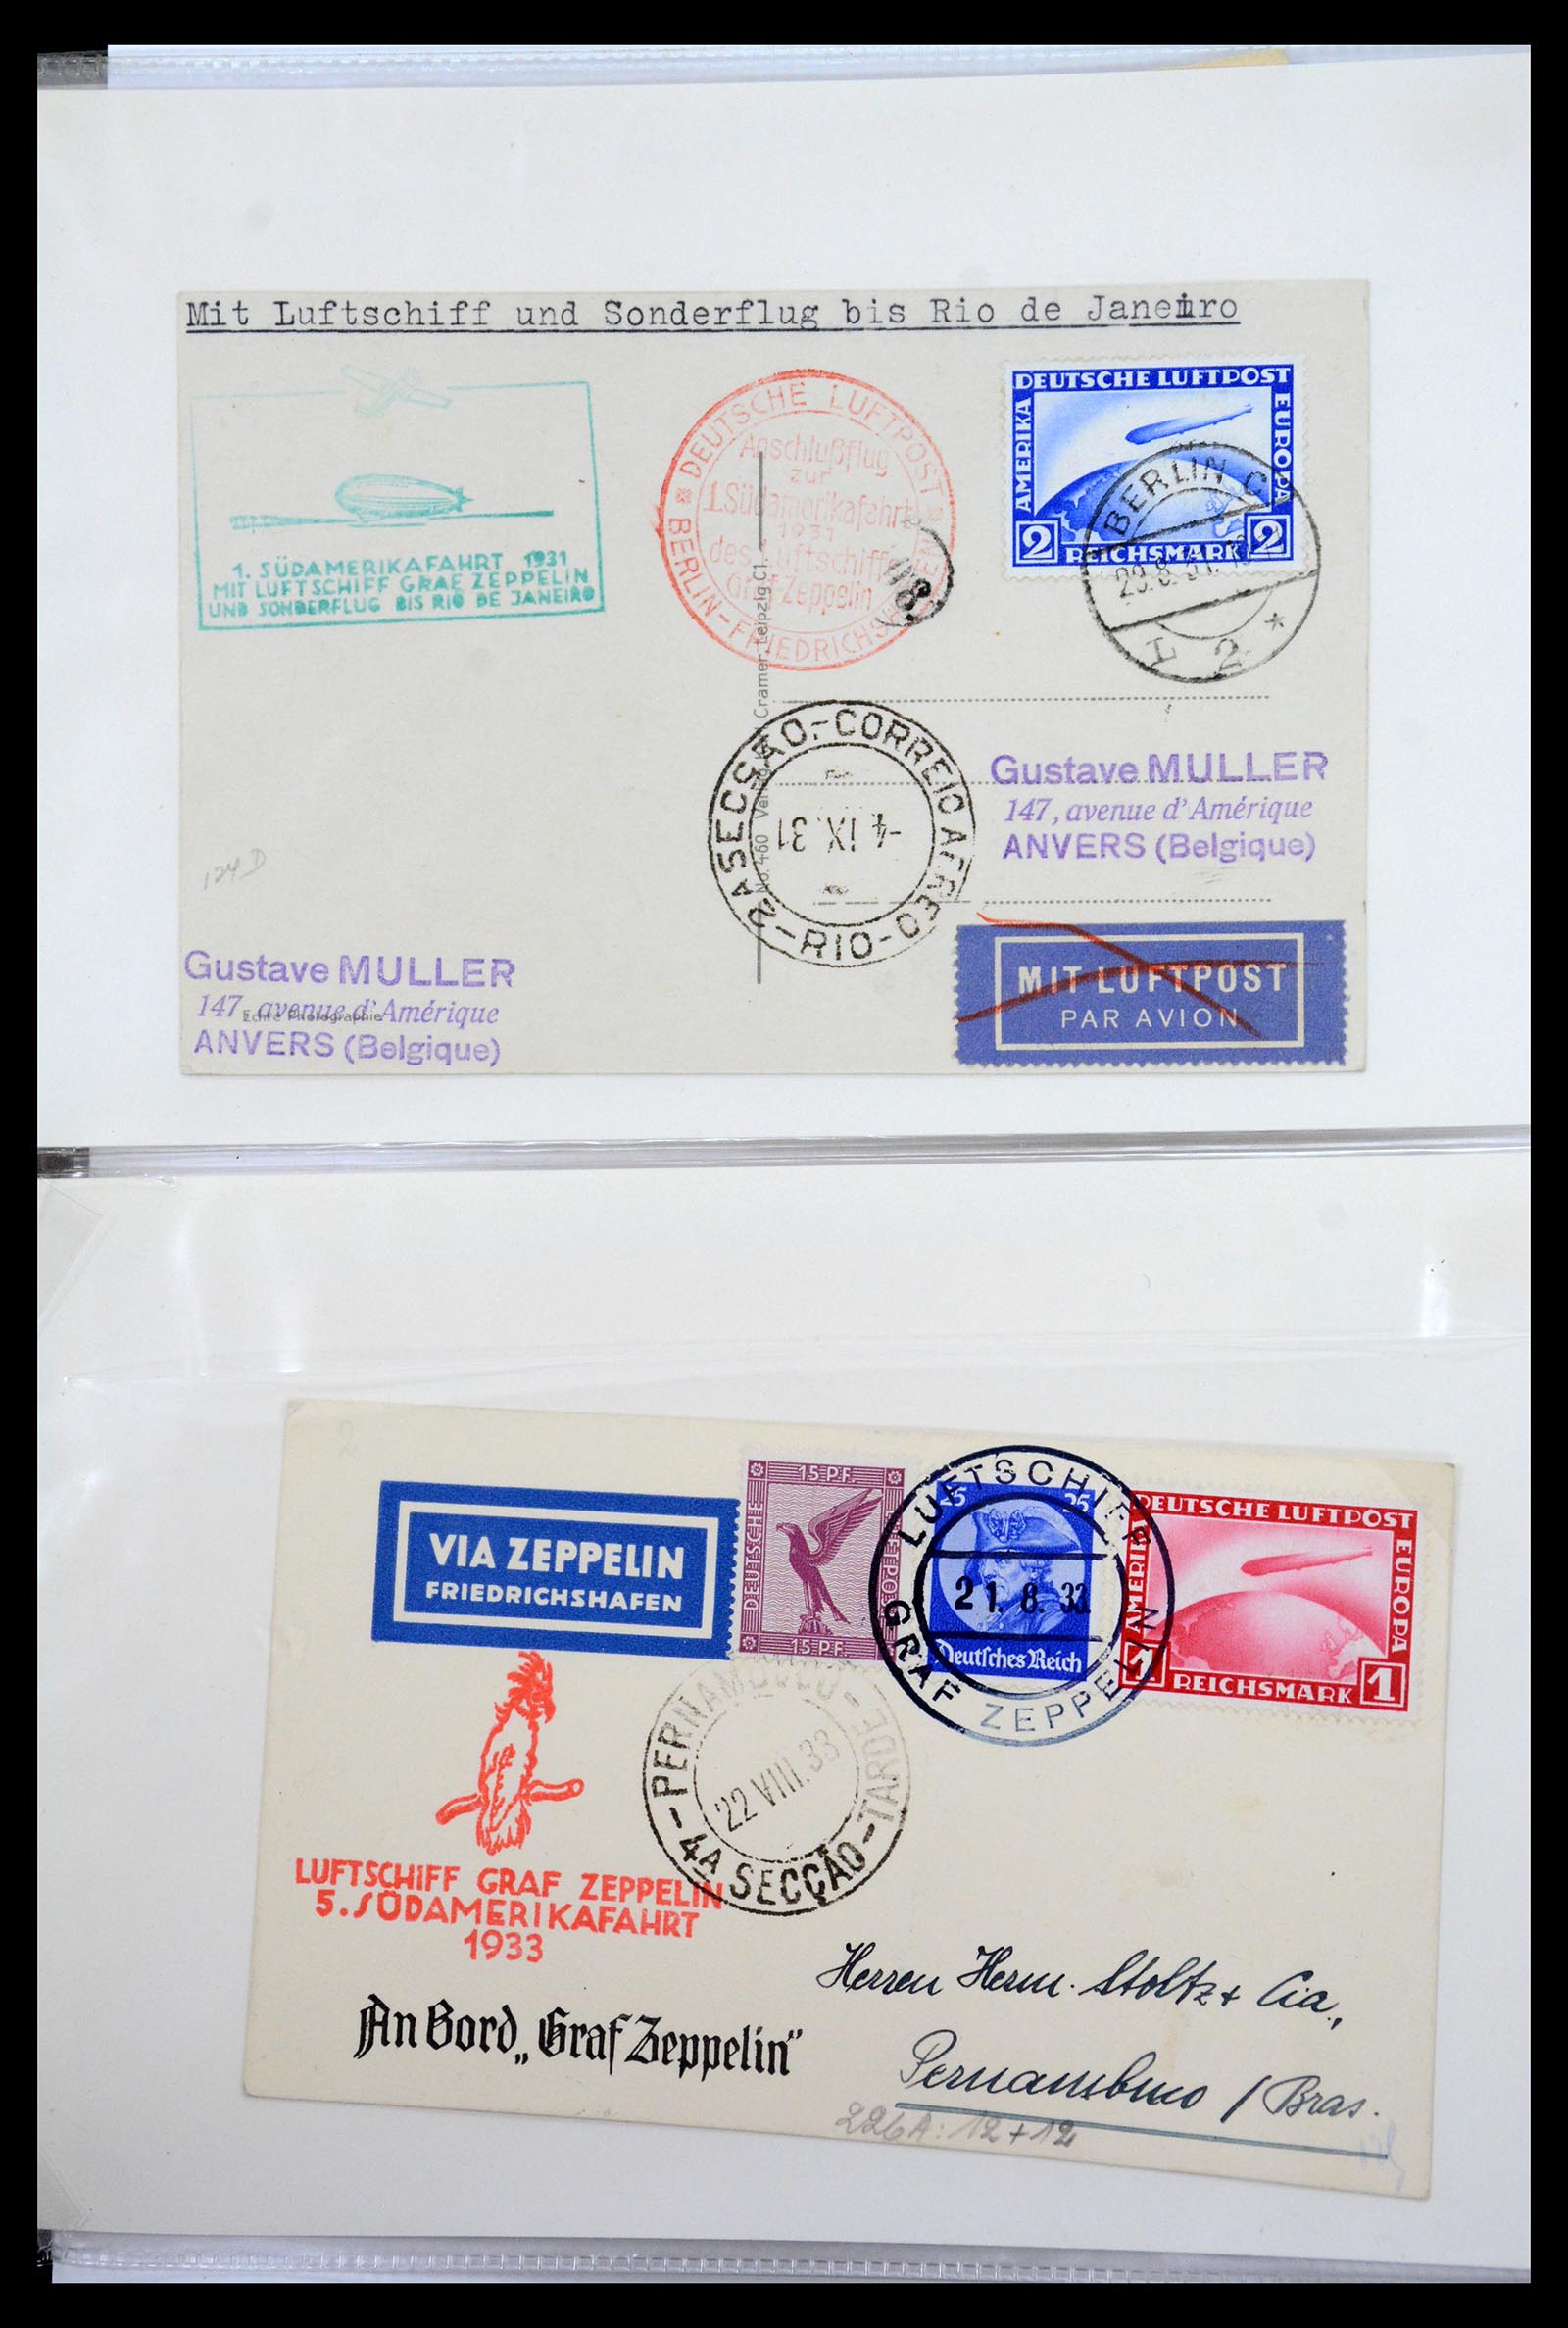 36009 011 - Stamp collection 36009 Airmail stamps and covers 1920-1940.